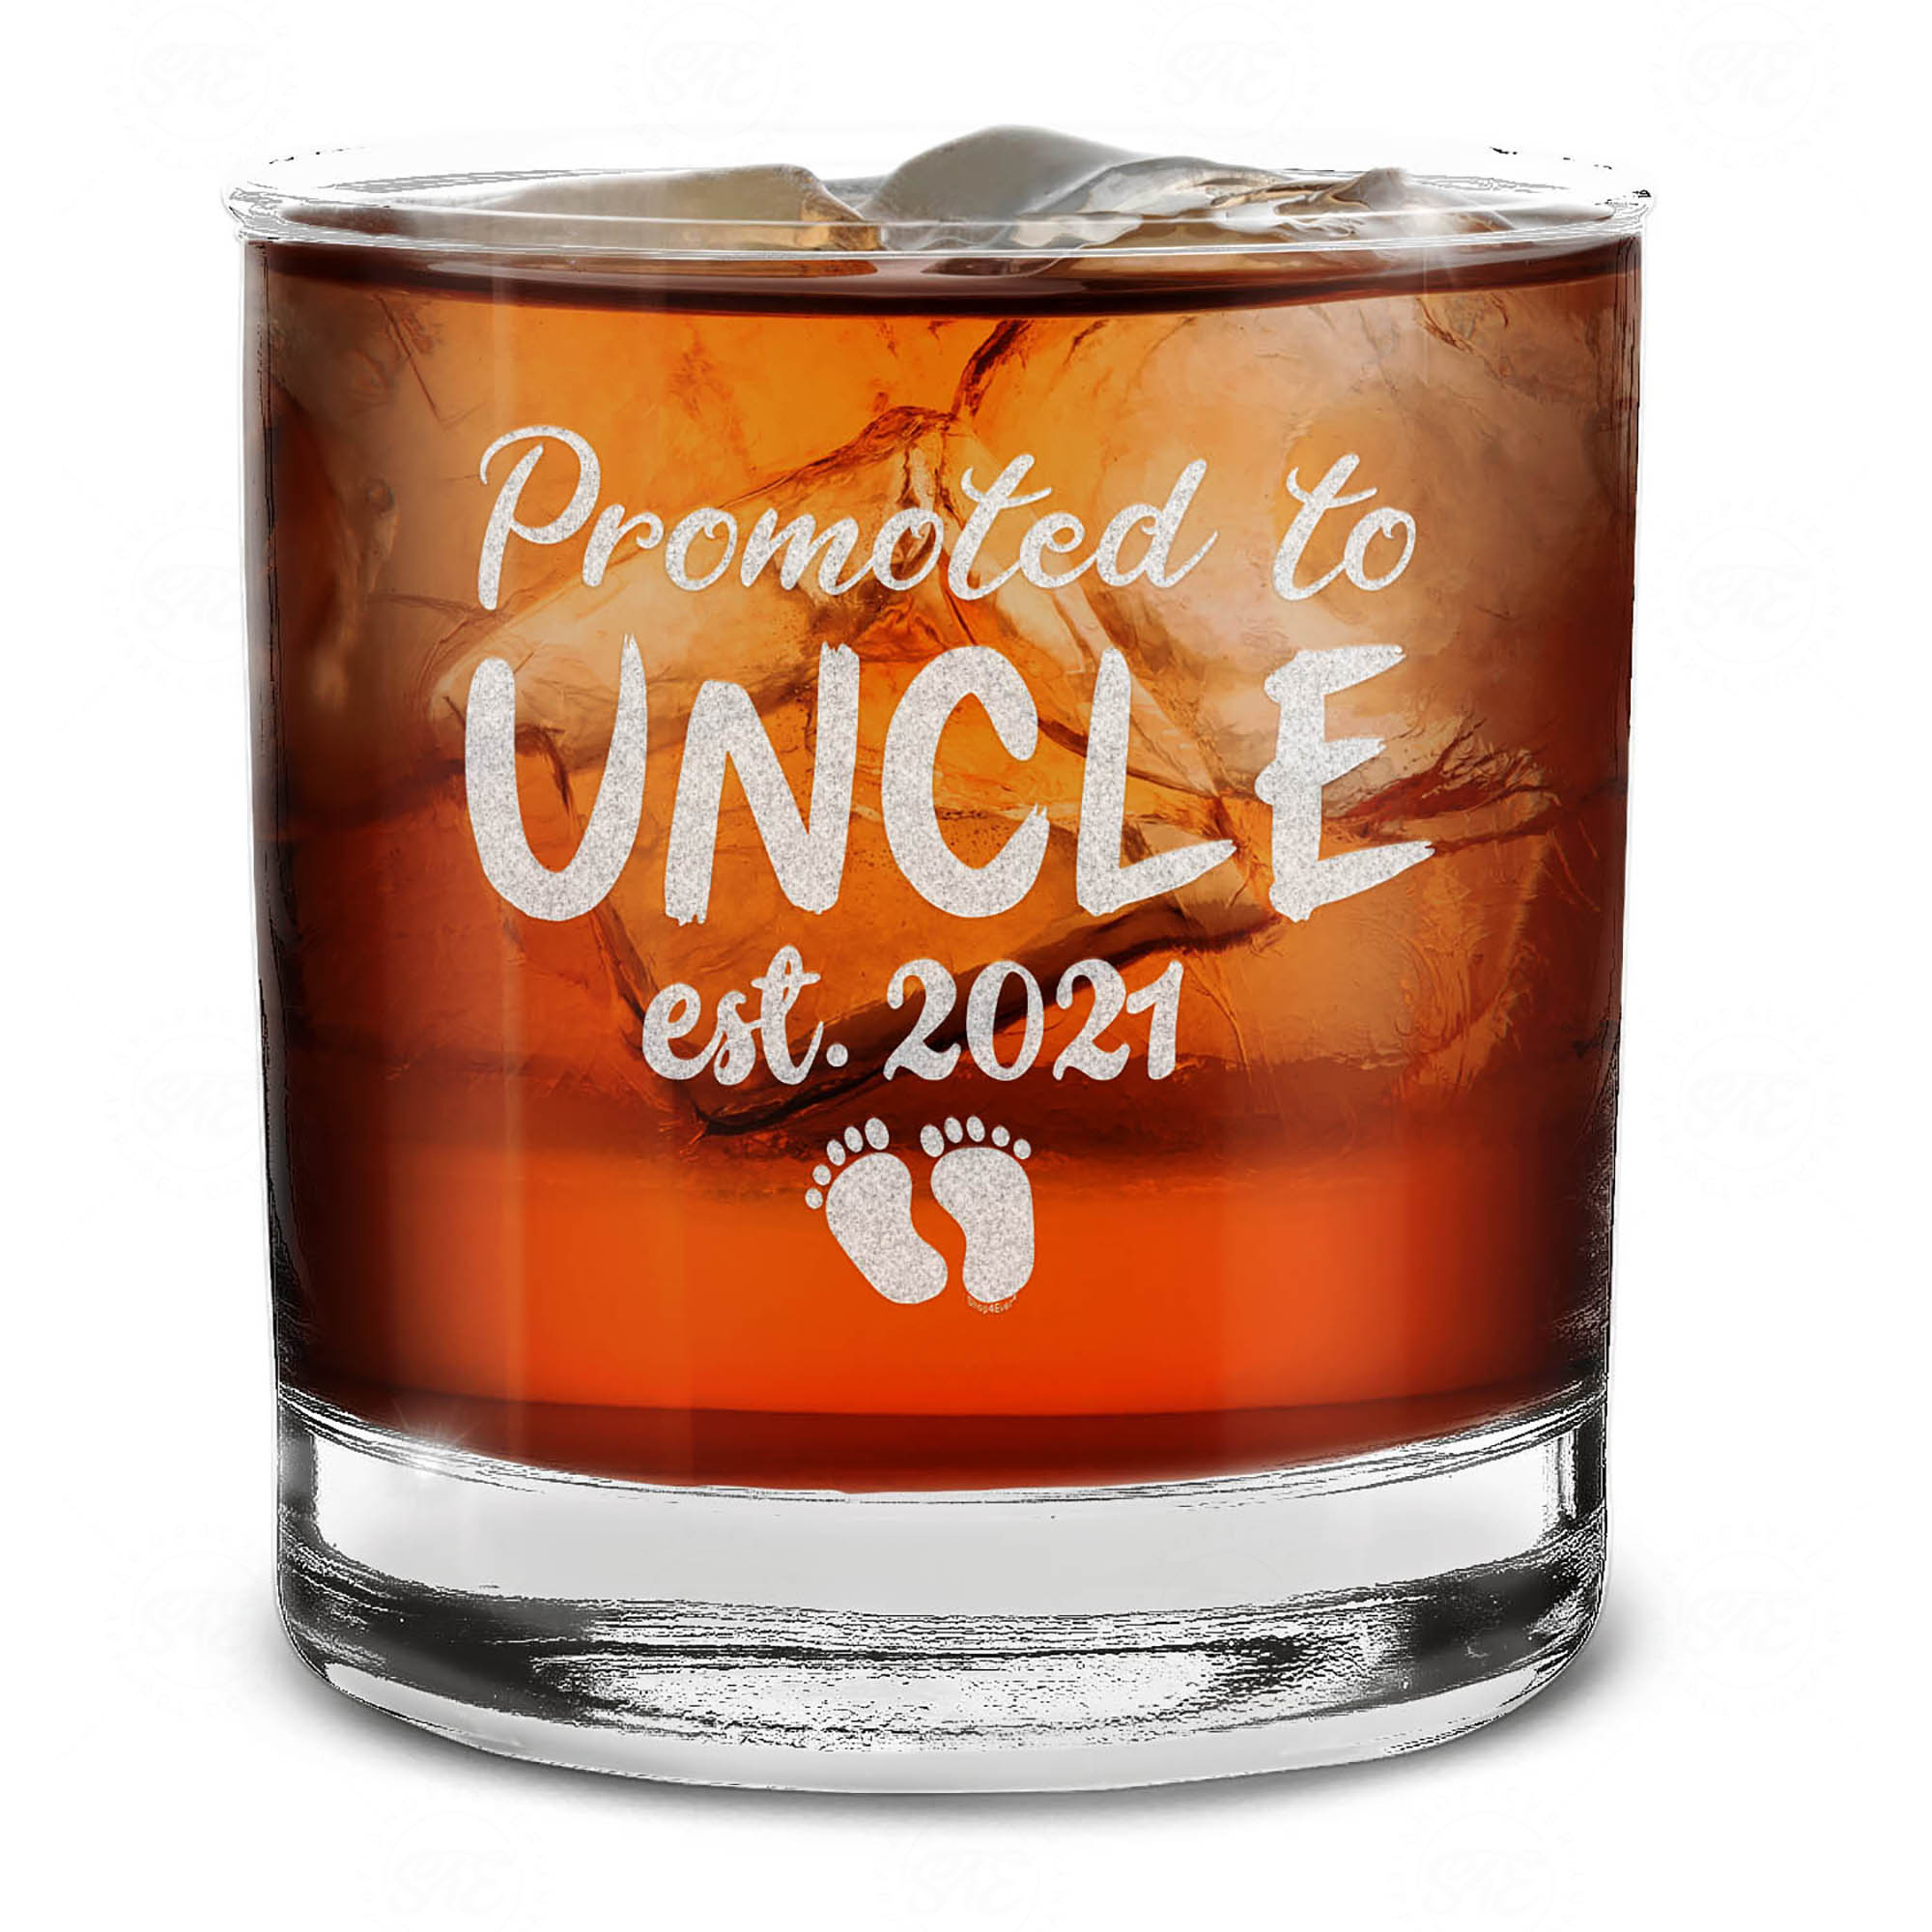 Promoted To Uncle Est 2021 Engraved Whiskey Glass